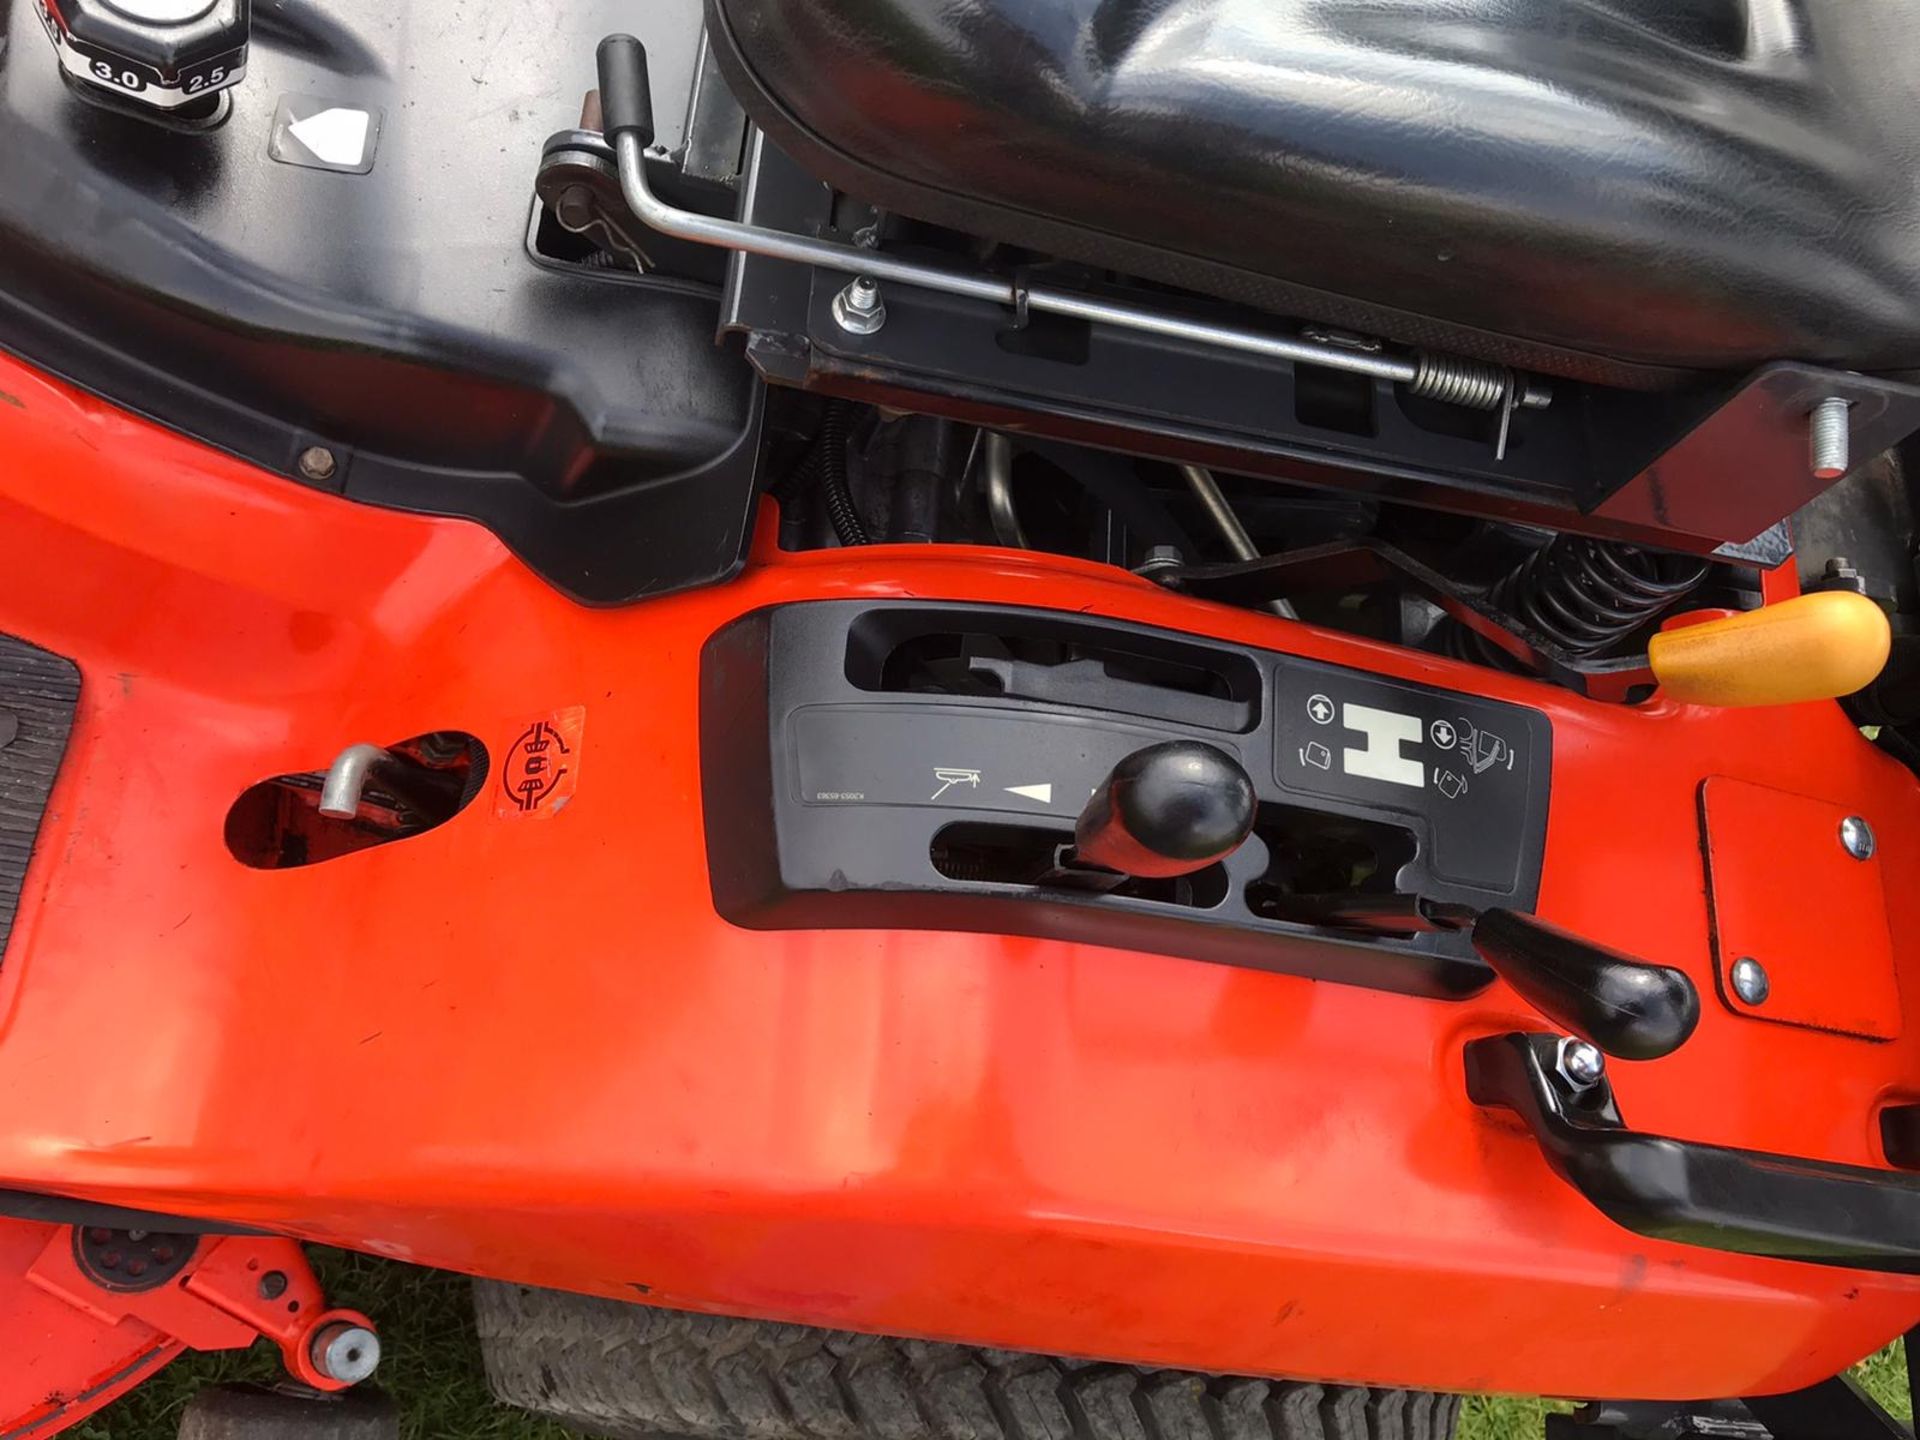 KUBOTA G23-11, MODEL G23-3HD RIDE ON MOWER, 48” MID MOUNTED CUTTING DECK. YEAR 2015, 995 LOW HOURS - Image 9 of 13